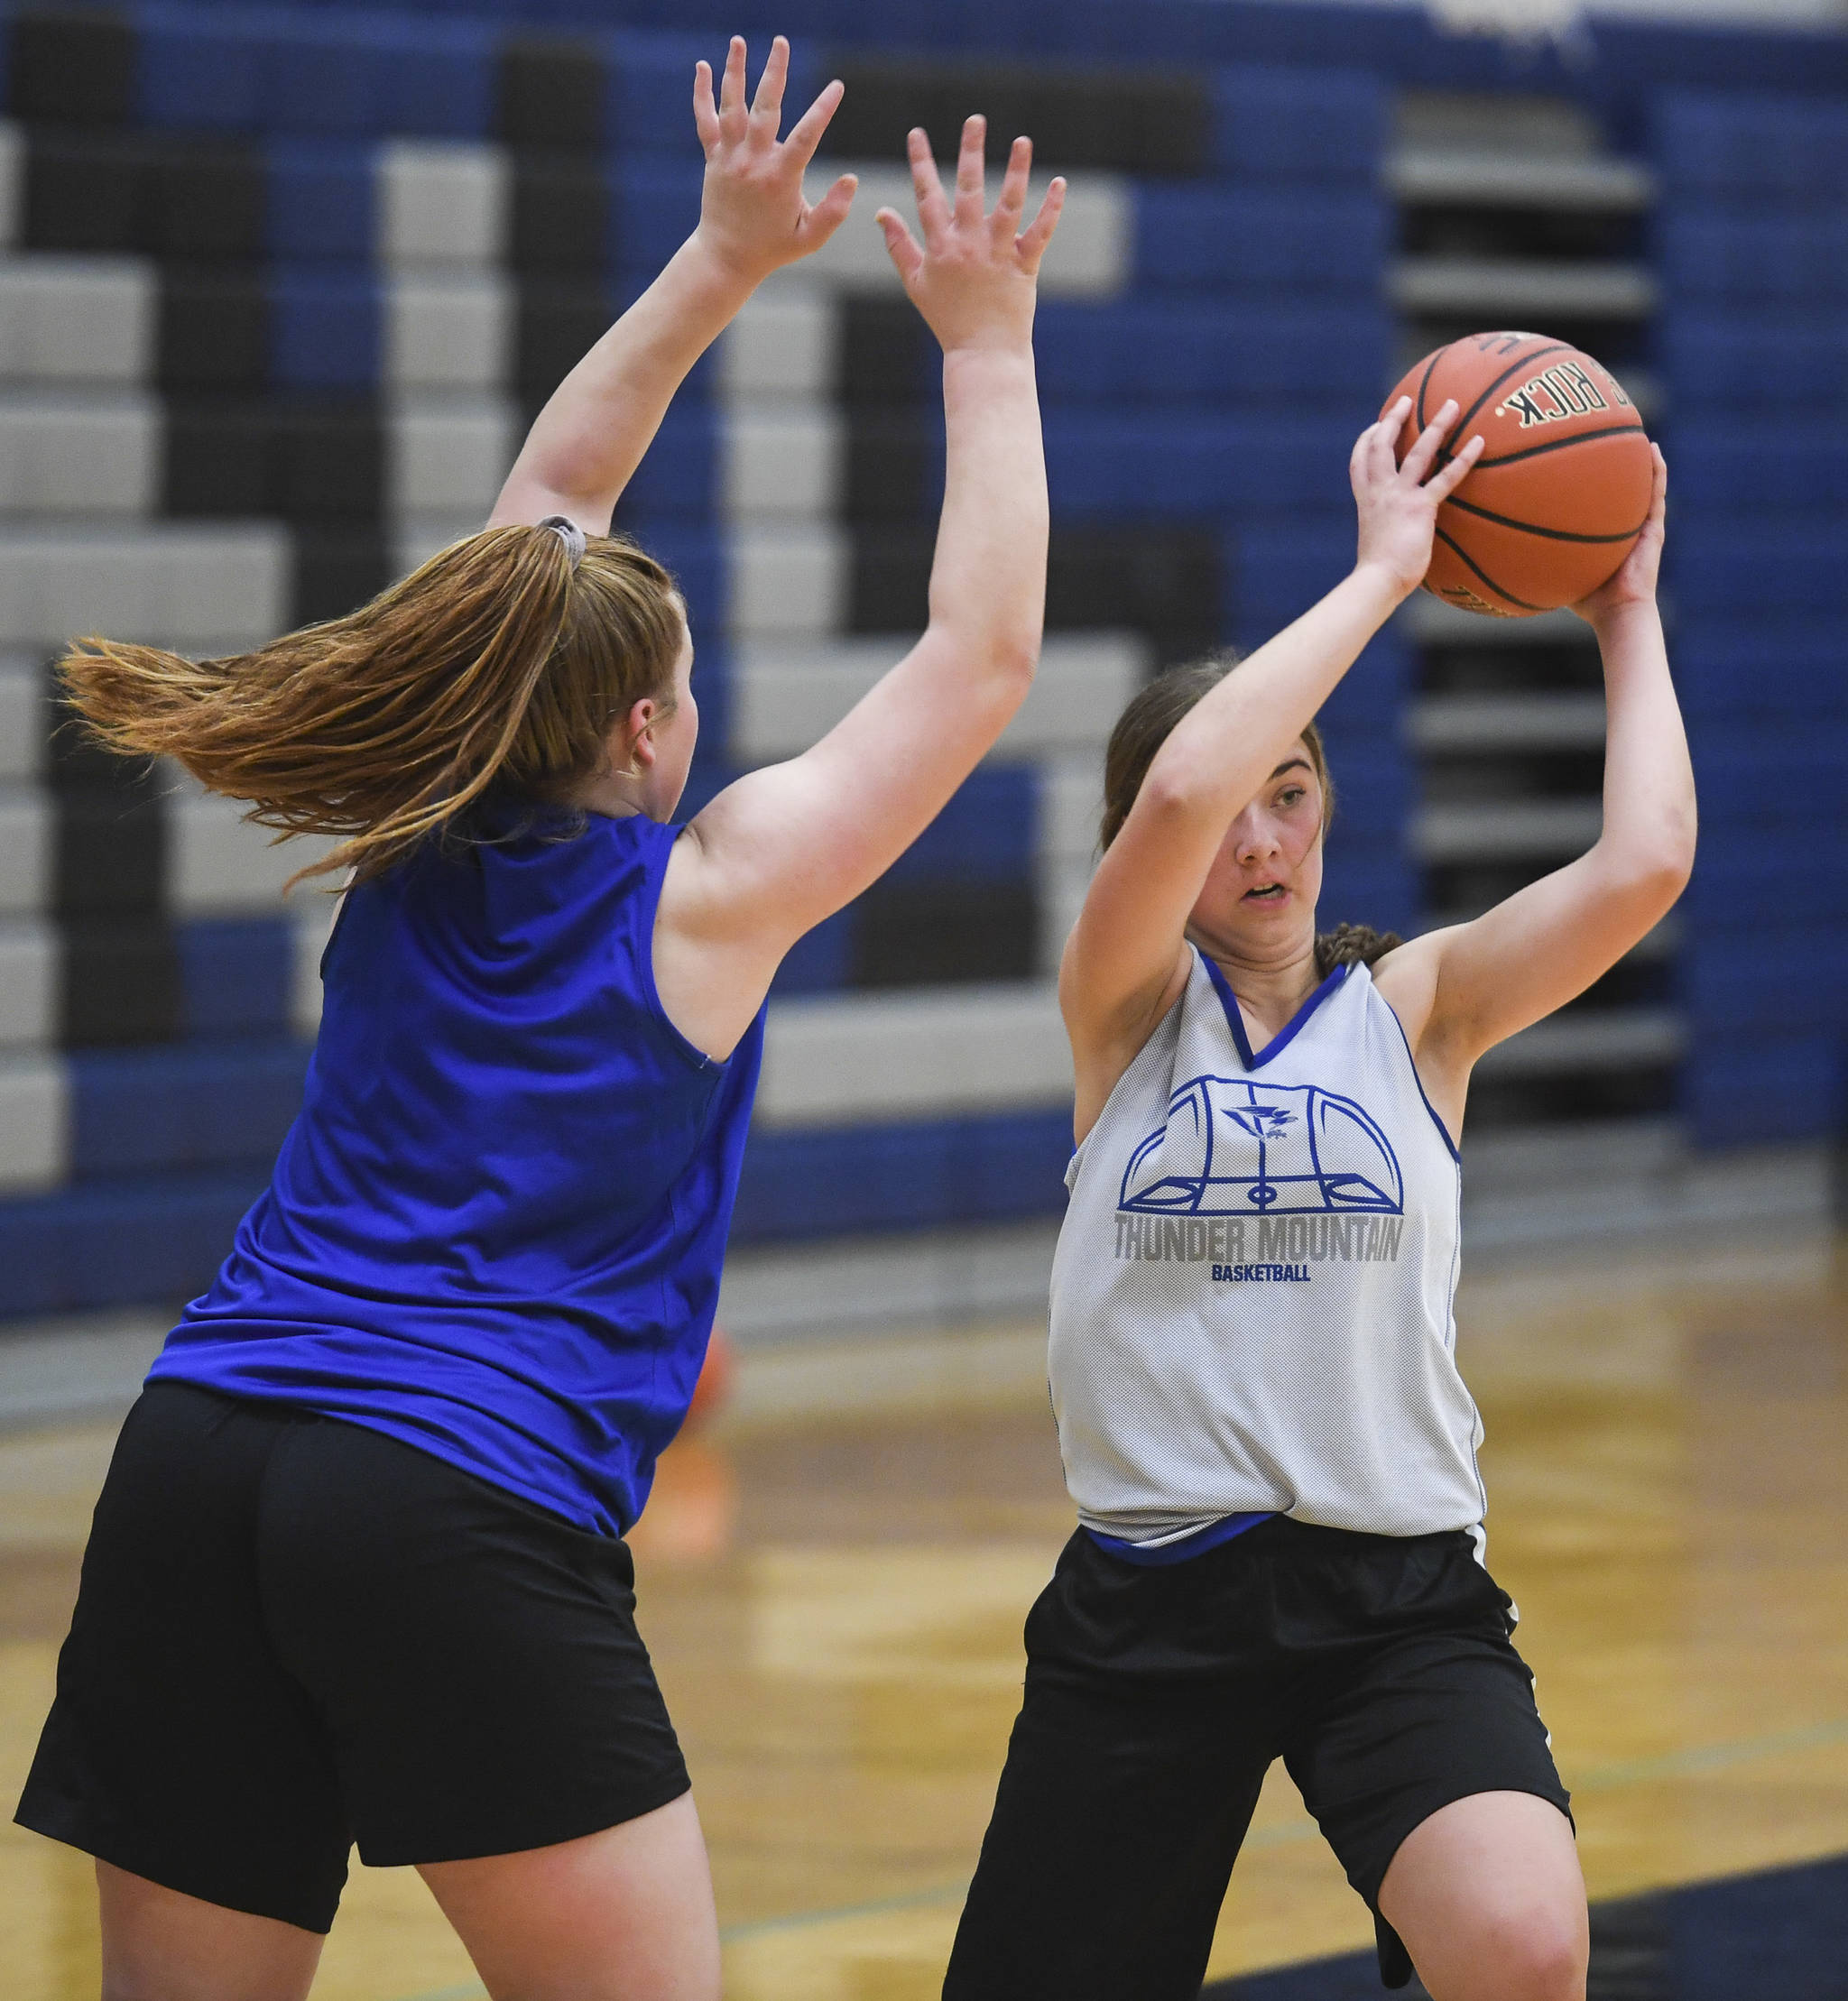 Samantha Dilley, right, evades the defense of Sydney Strong during the girls varsity basketball practice at Thunder Mountain High School on Monday, Dec. 9, 2019. (Michael Penn | Juneau Empire)